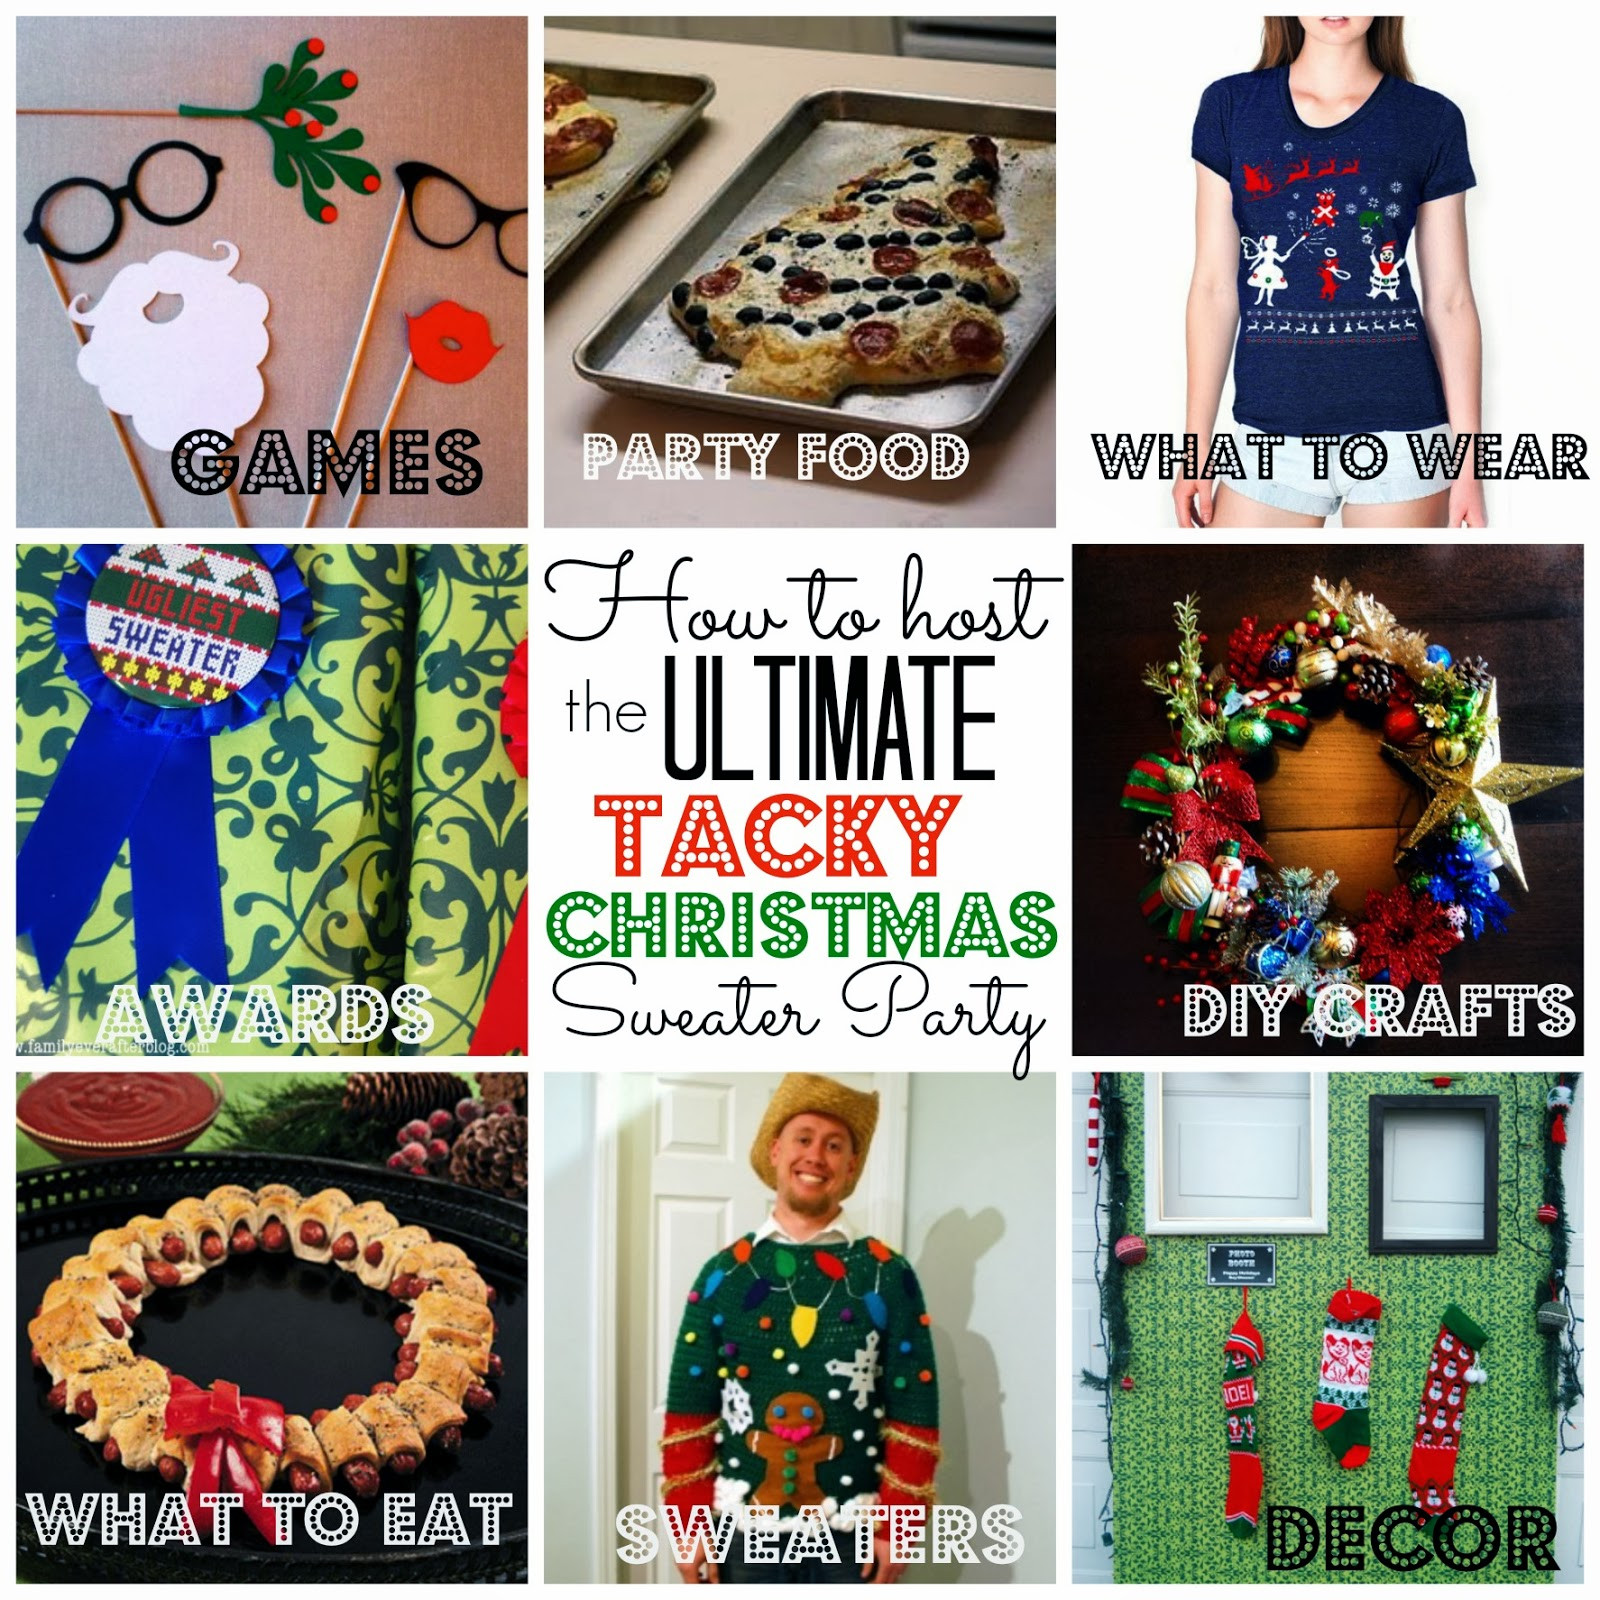 Christmas Sweater Ideas For A Party
 Crafty Texas Girls Party Planning Tacky Christmas Sweater